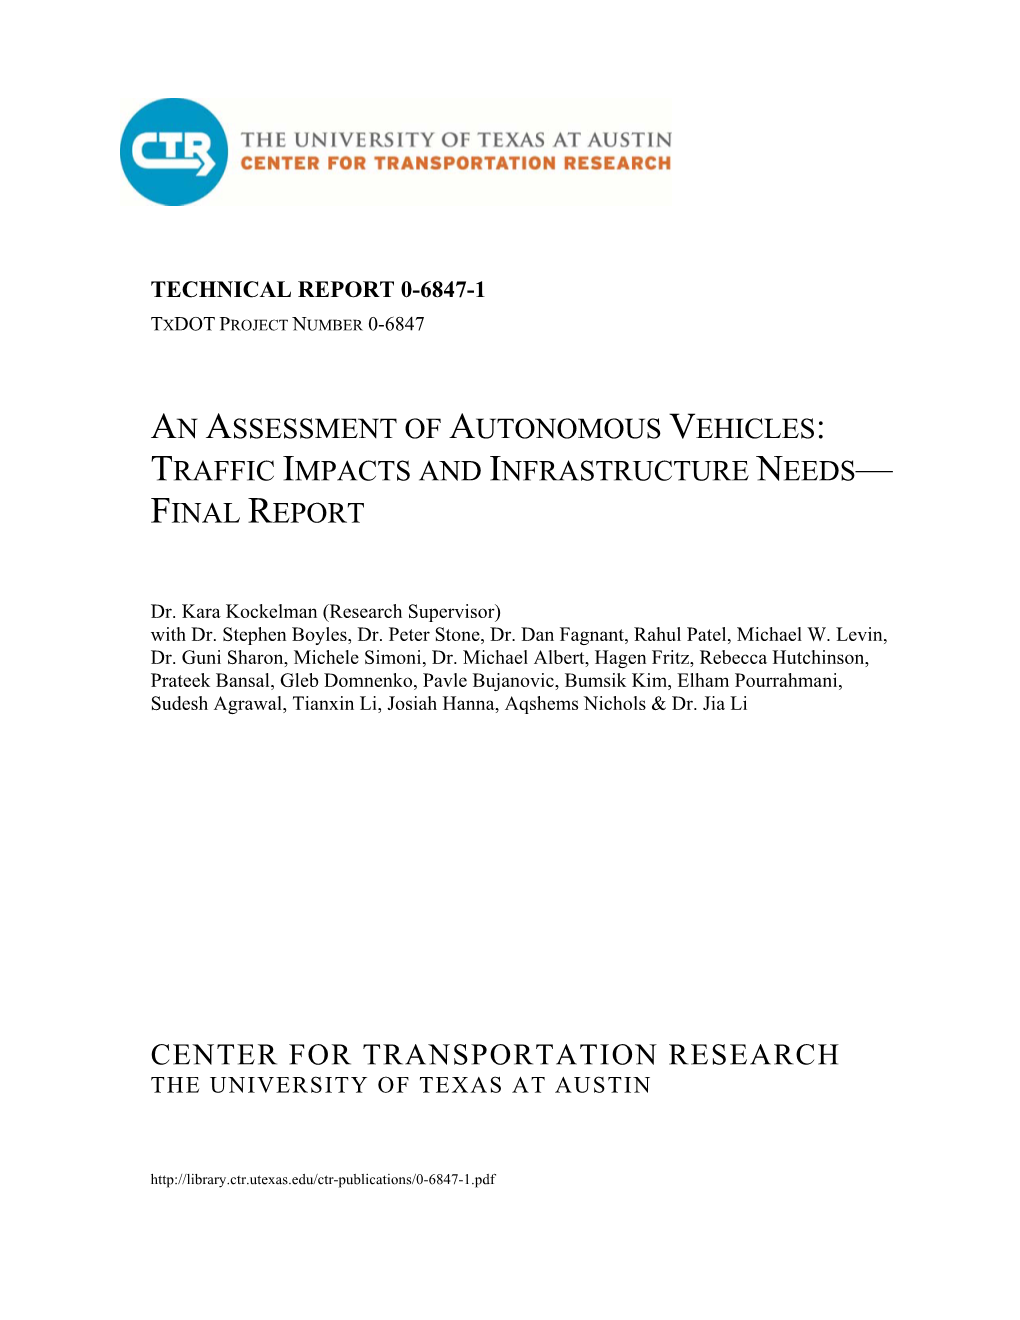 Traffic Impacts and Infrastructure Needs—Final Report